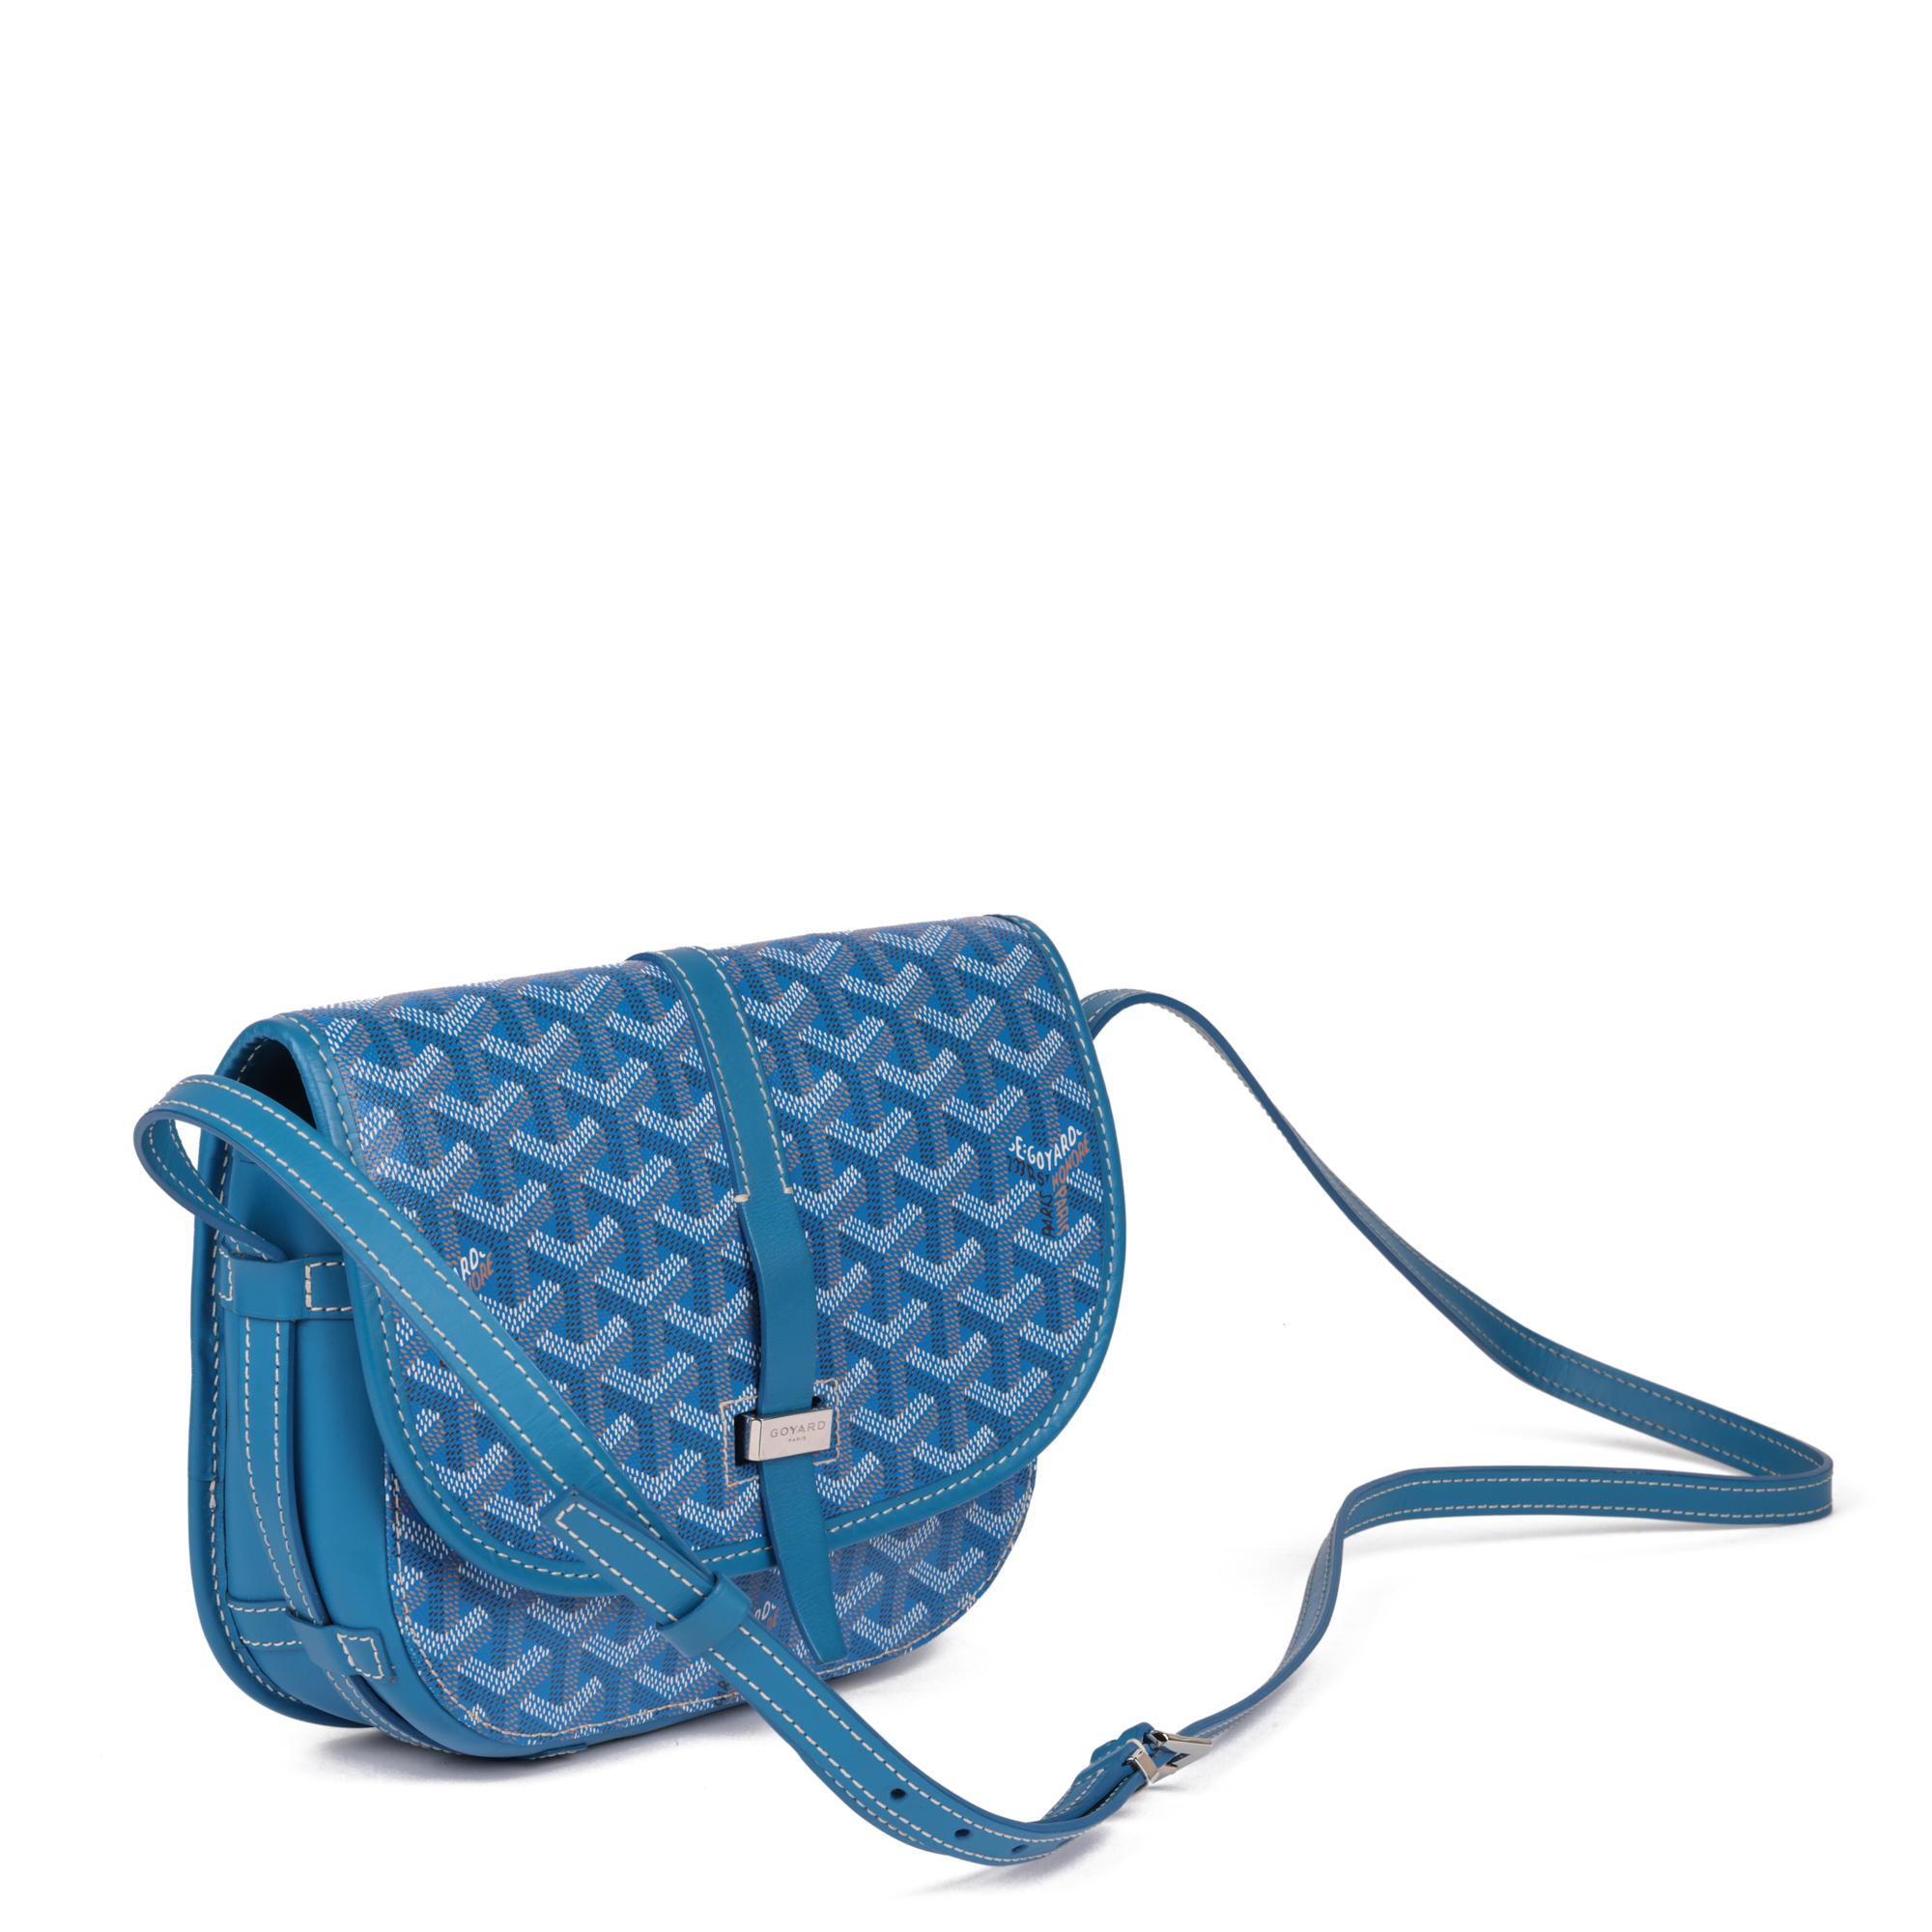 GOYARD
Blue Chevron Coated Canvas & Calfskin Leather Belvedere PM

Xupes Reference: HB5176
Serial Number: IDC020205
Age (Circa): 2020
Accompanied By: Goyard Dust Bag 
Authenticity Details: Date Stamp (Made in France)
Gender: Ladies
Type: Shoulder,